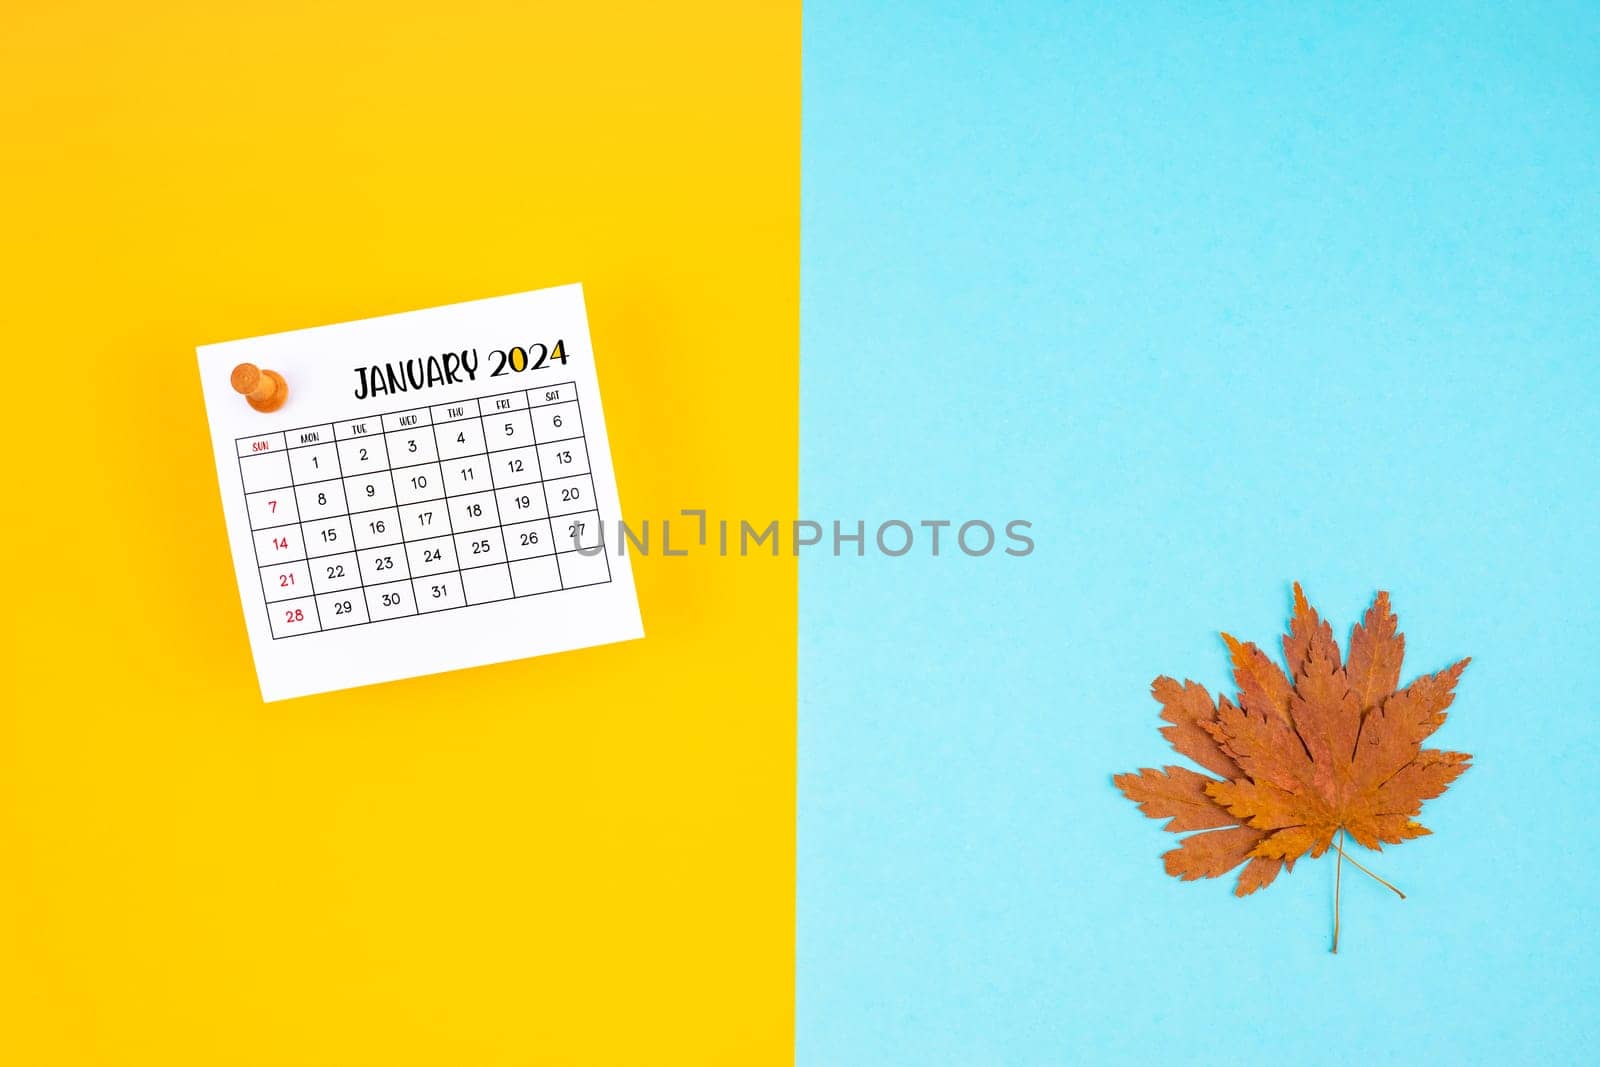 Top view of a January 2024 calendar and autumn foliage on a yellow and blue background. Empty space provided for text or advertising purposes